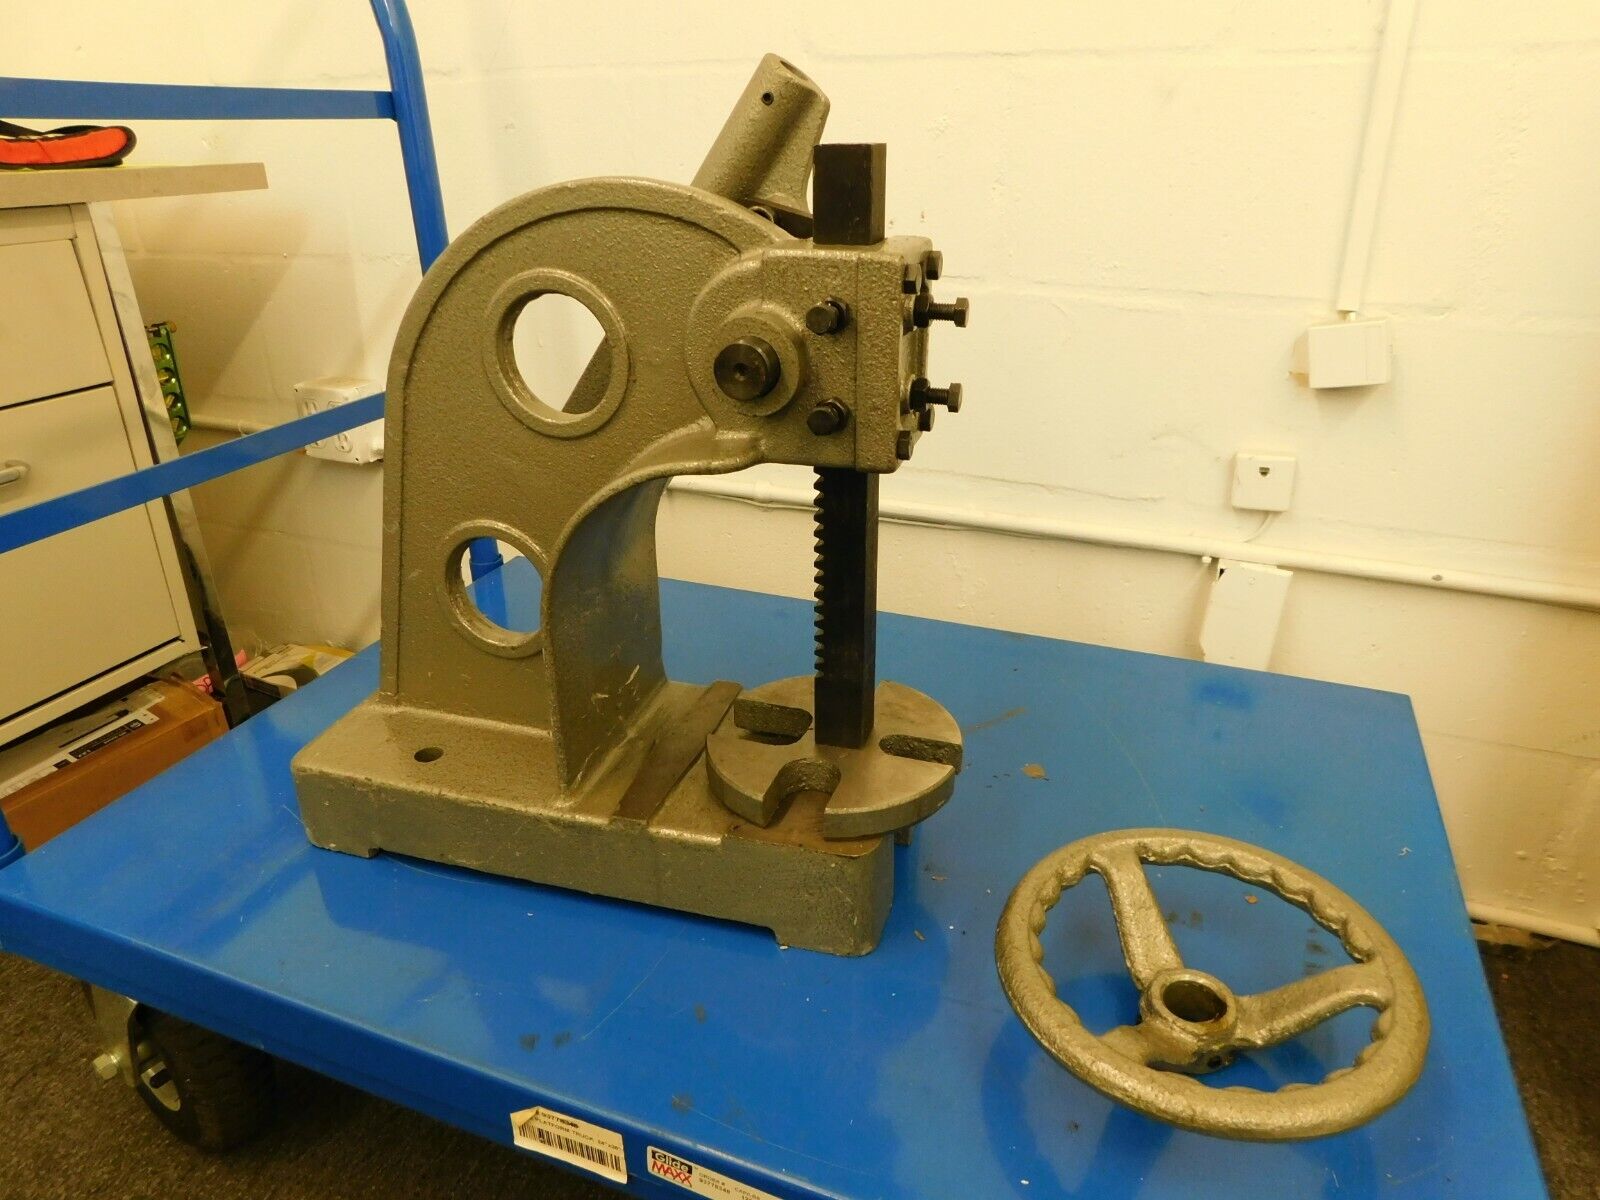 Dayton Arbor Press: 2 ton Force in Tons, 11 in Swing , 7-1/4 x 6